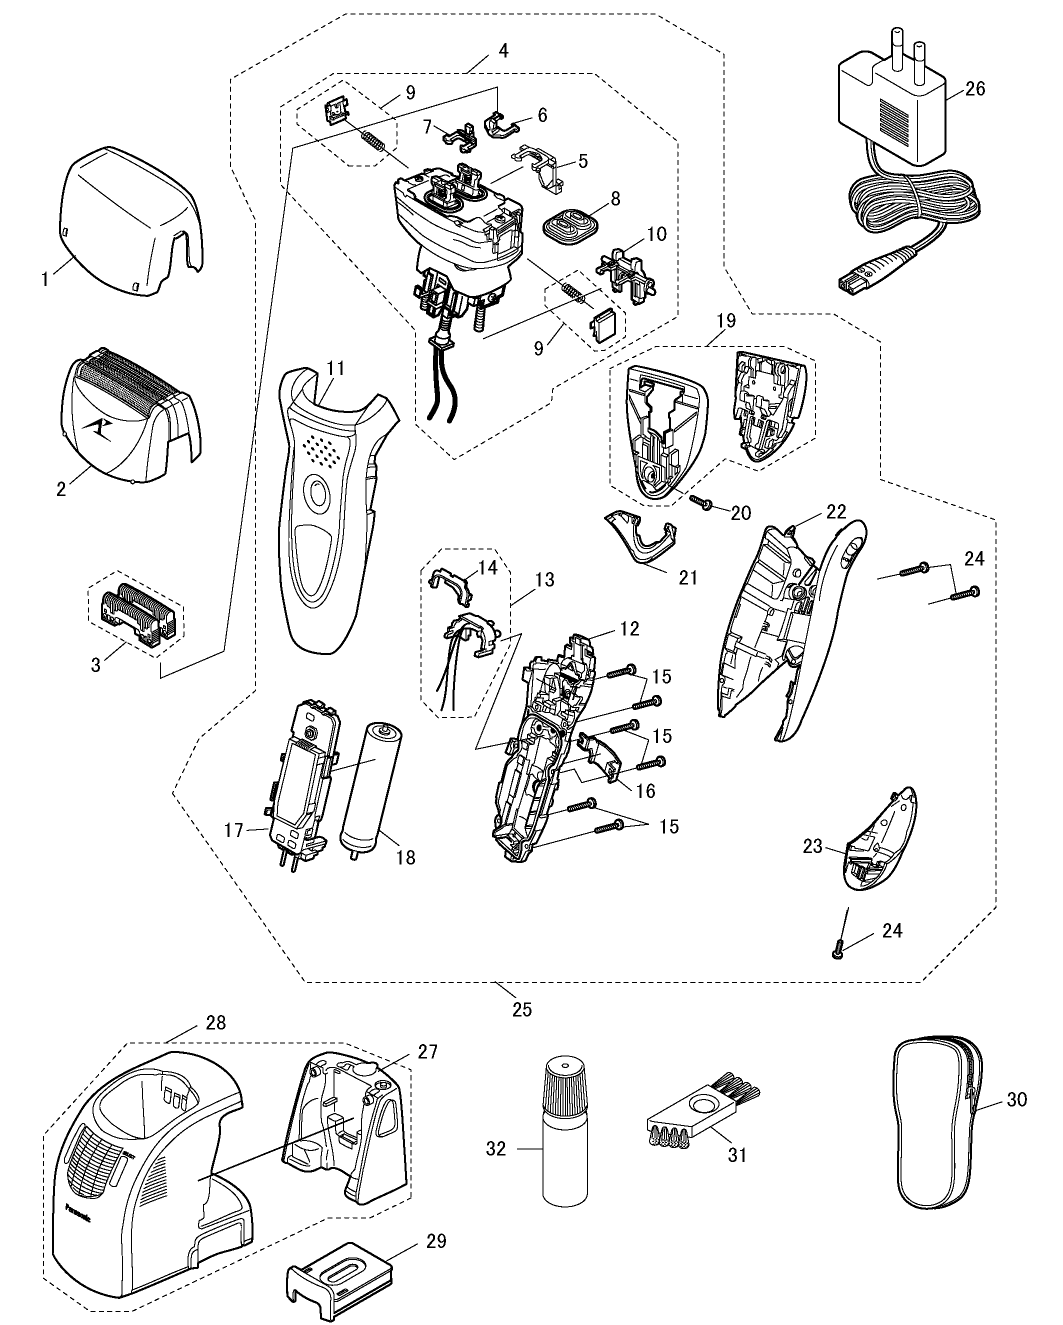 ES-8901: Exploded View